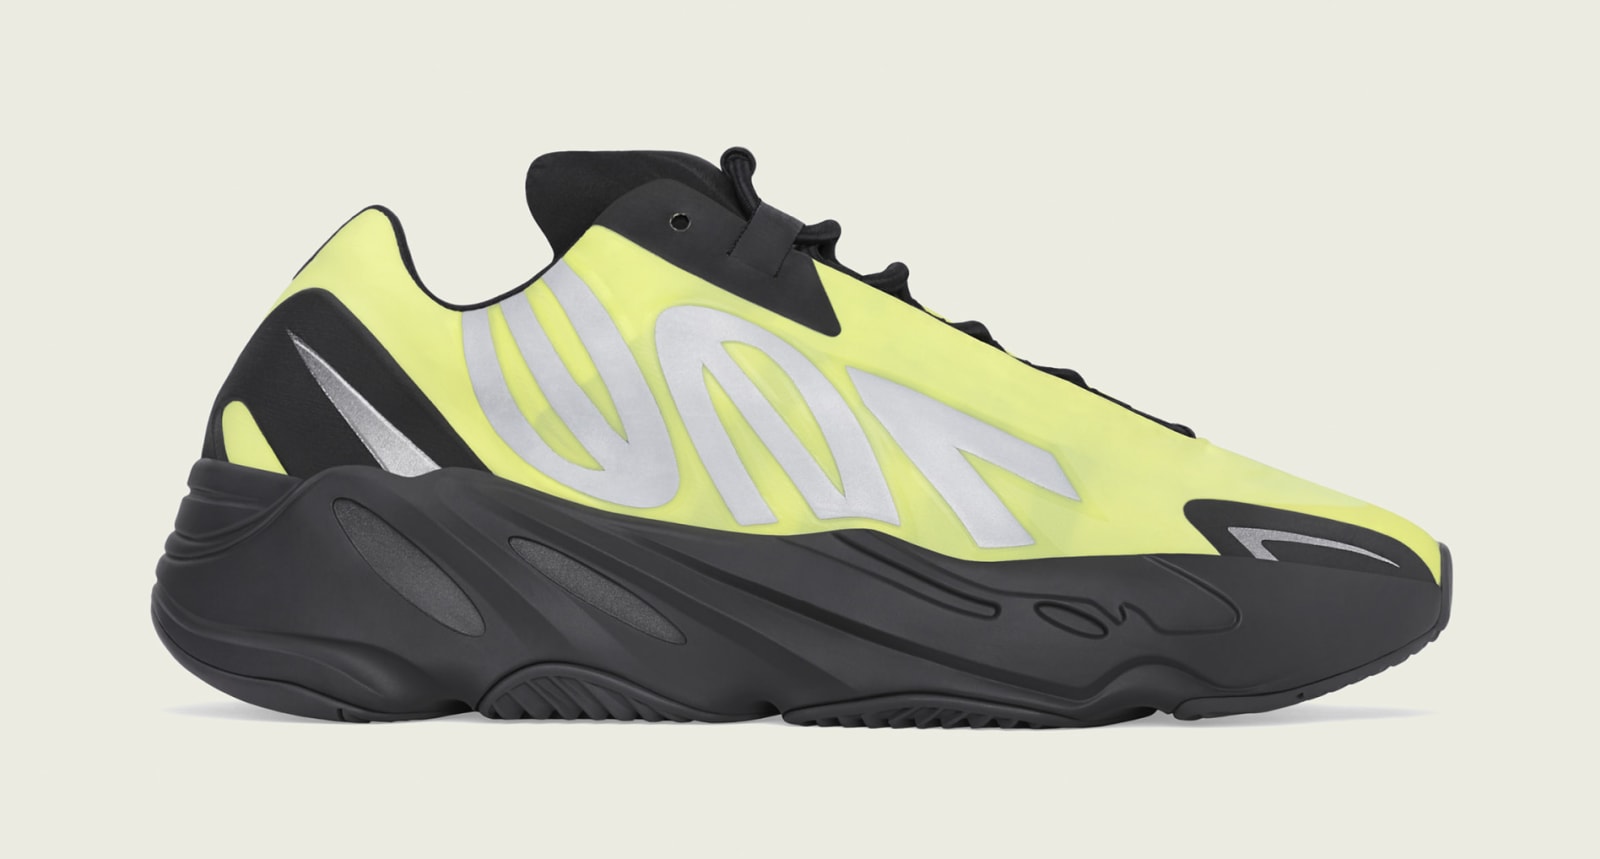 Adidas Yeezy Boost 700 MNVN &quot;Phosphor&quot; Release Date Revealed